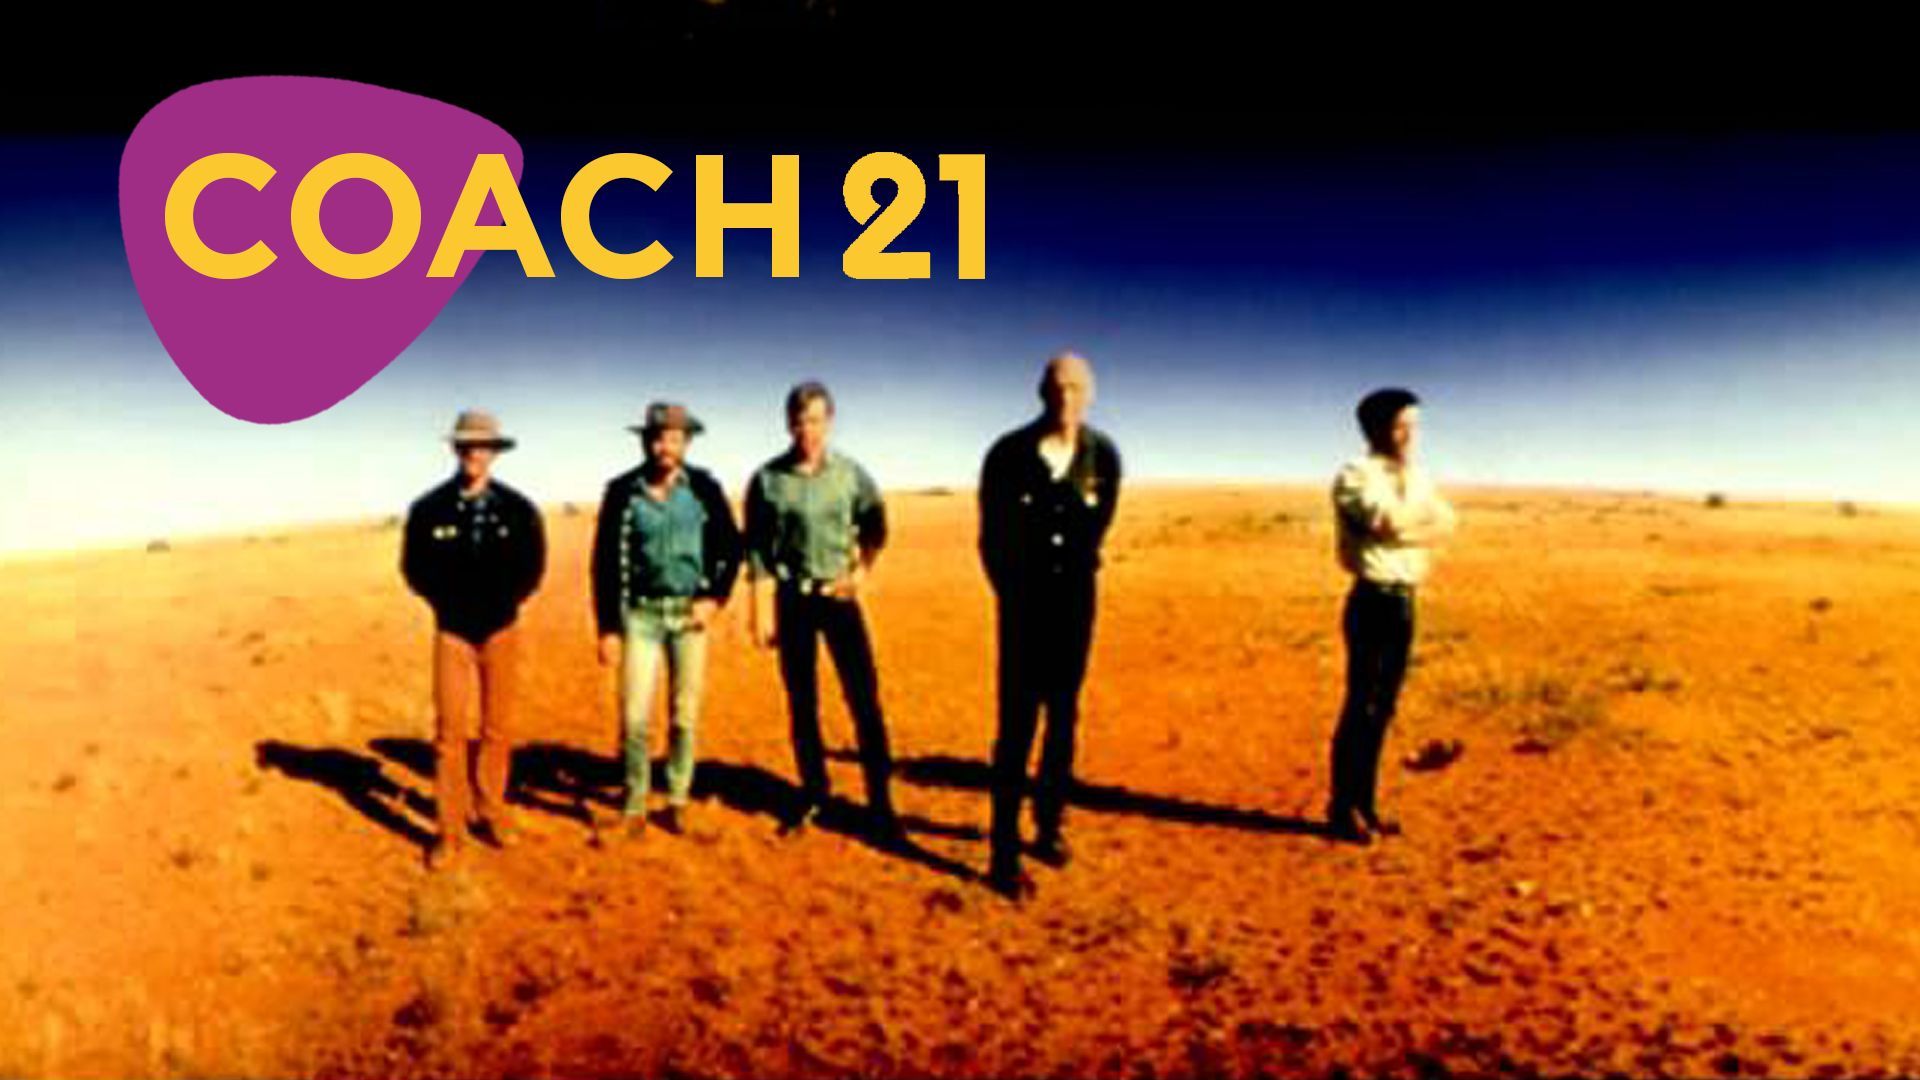 [Coach 21] Midnight Oil – Beds Are Burning